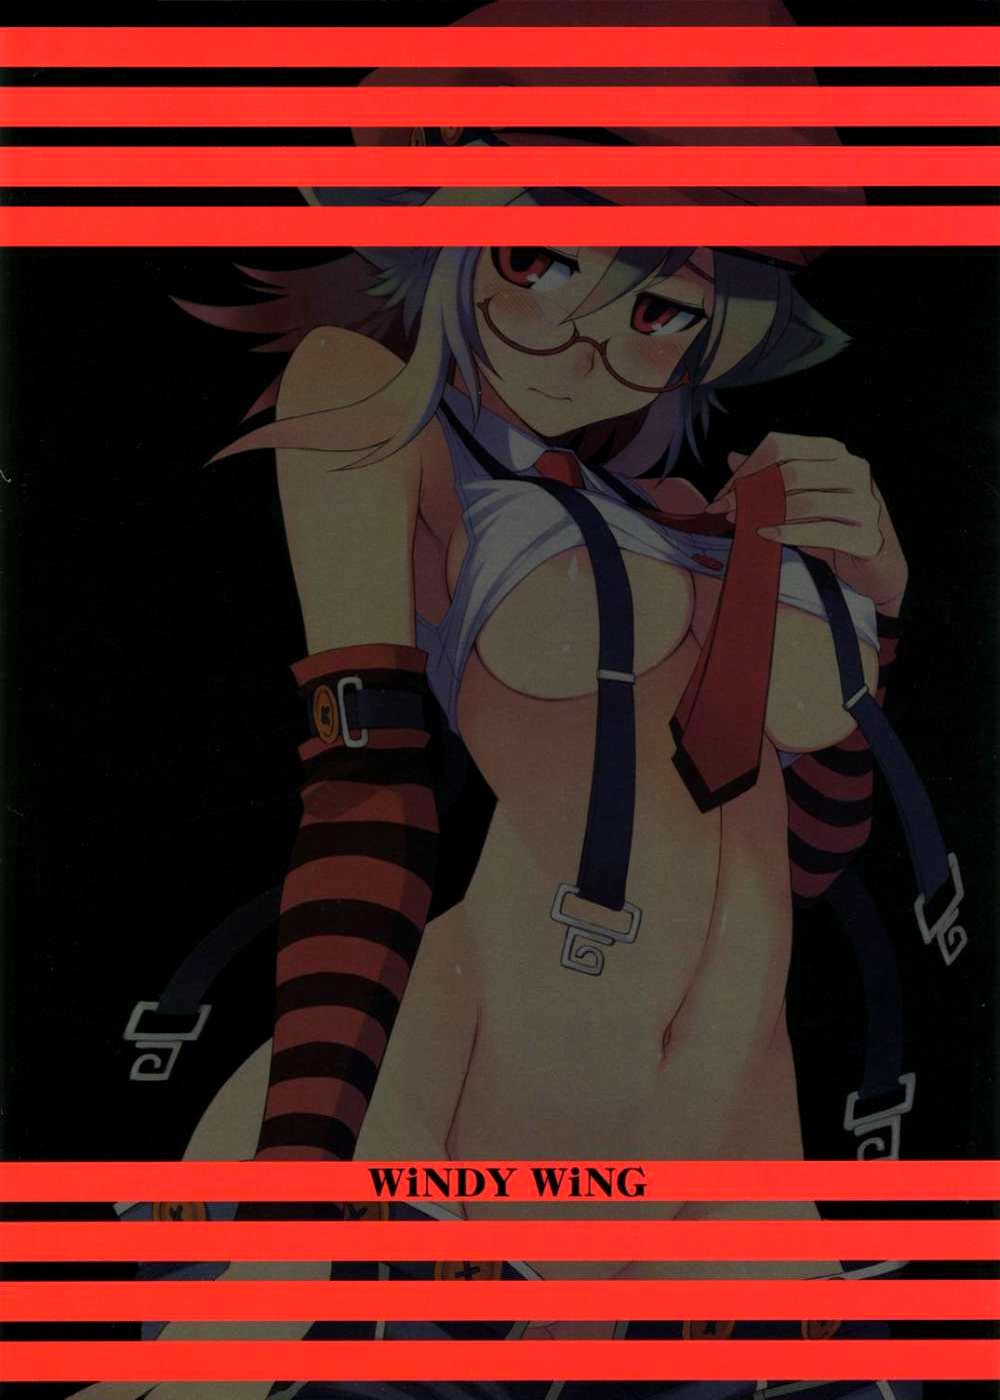 Windy Wing [Tonbo Kusangi] DiNG DiNG 1 Complete! [English] [Soba-Scans] [WiNDY WiNG (草凪蜻蛉)] DiNG DiNG ① Complete! [英訳]